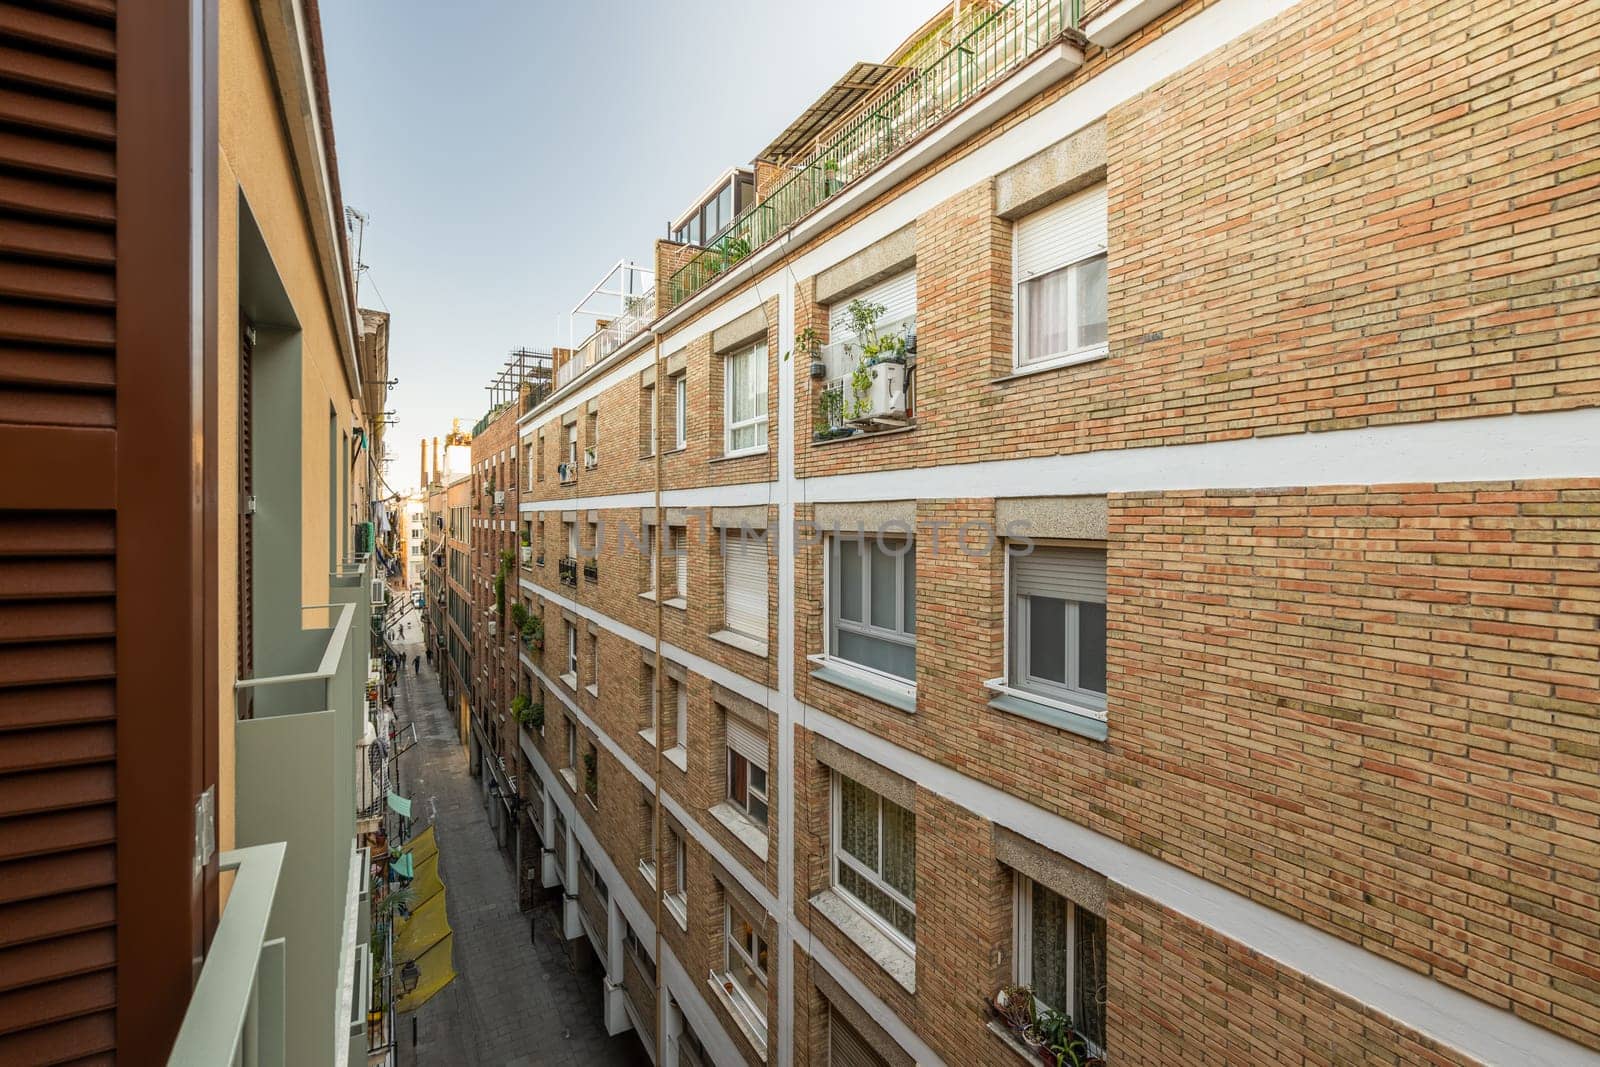 View from the balcony of a narrow barcelona street among modern brick houses. The concept of modern Spanish architecture. Tourist Europe by apavlin